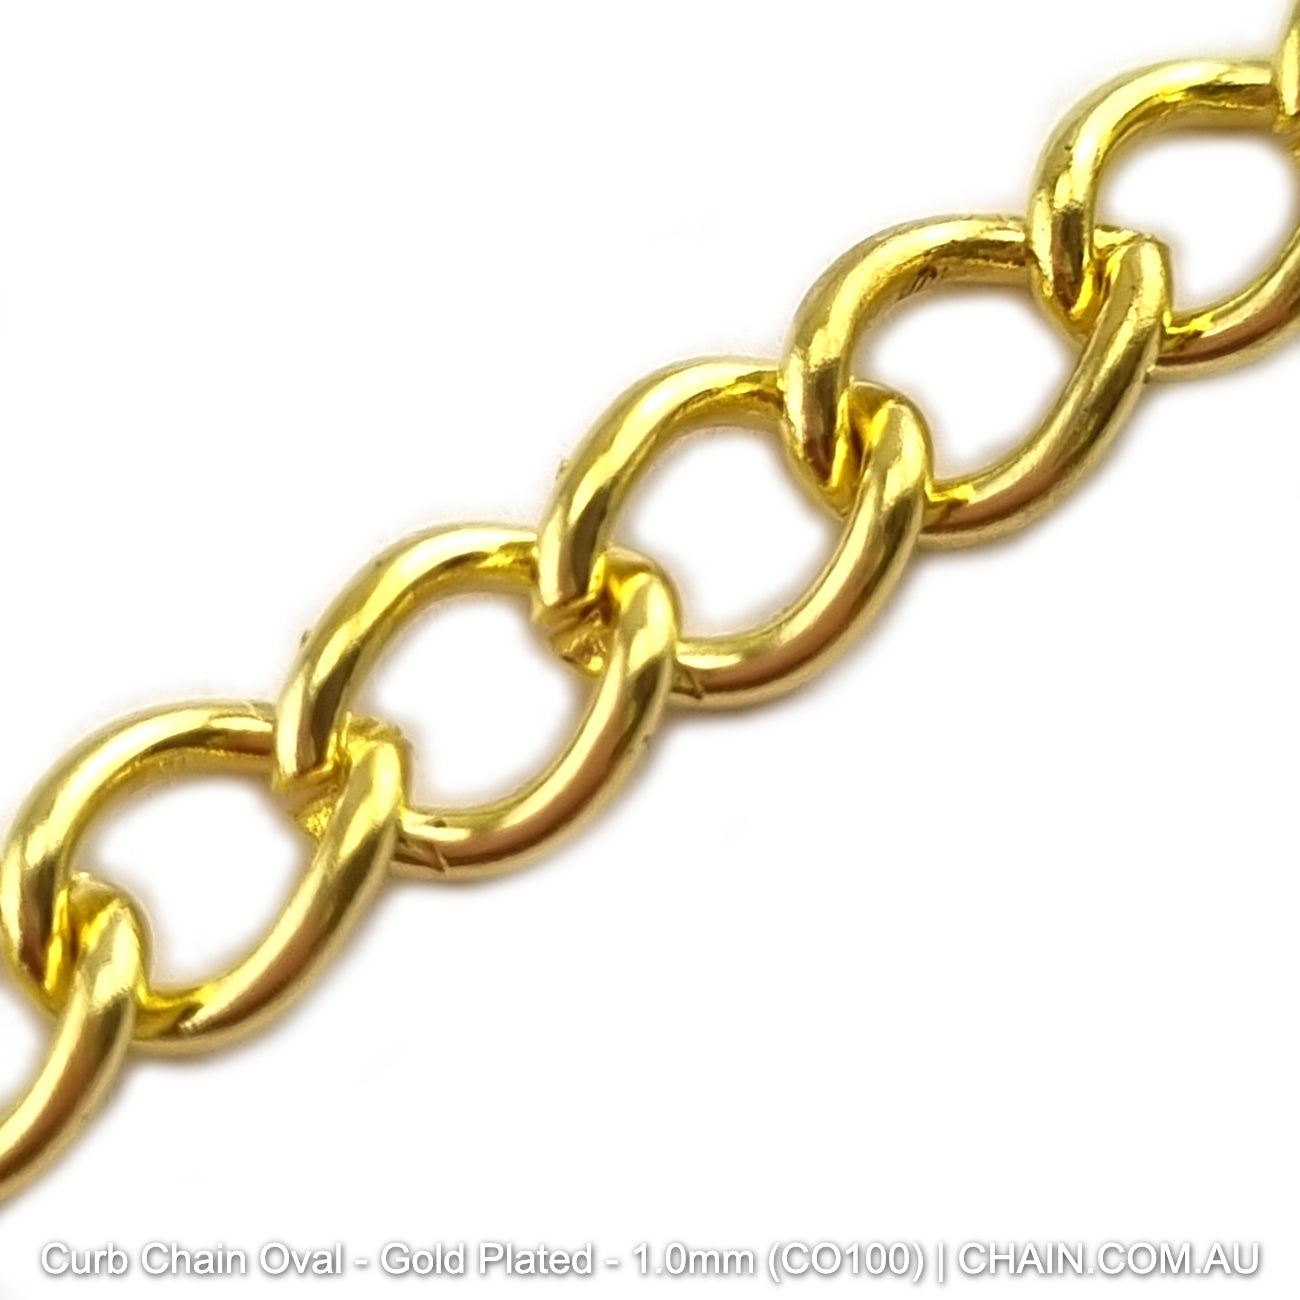 Oval Curb Chain in a Gold Plated Finish. Size: 1.0mm, CO100. Jewellery Chain, Australia wide shipping. Shop chain.com.au